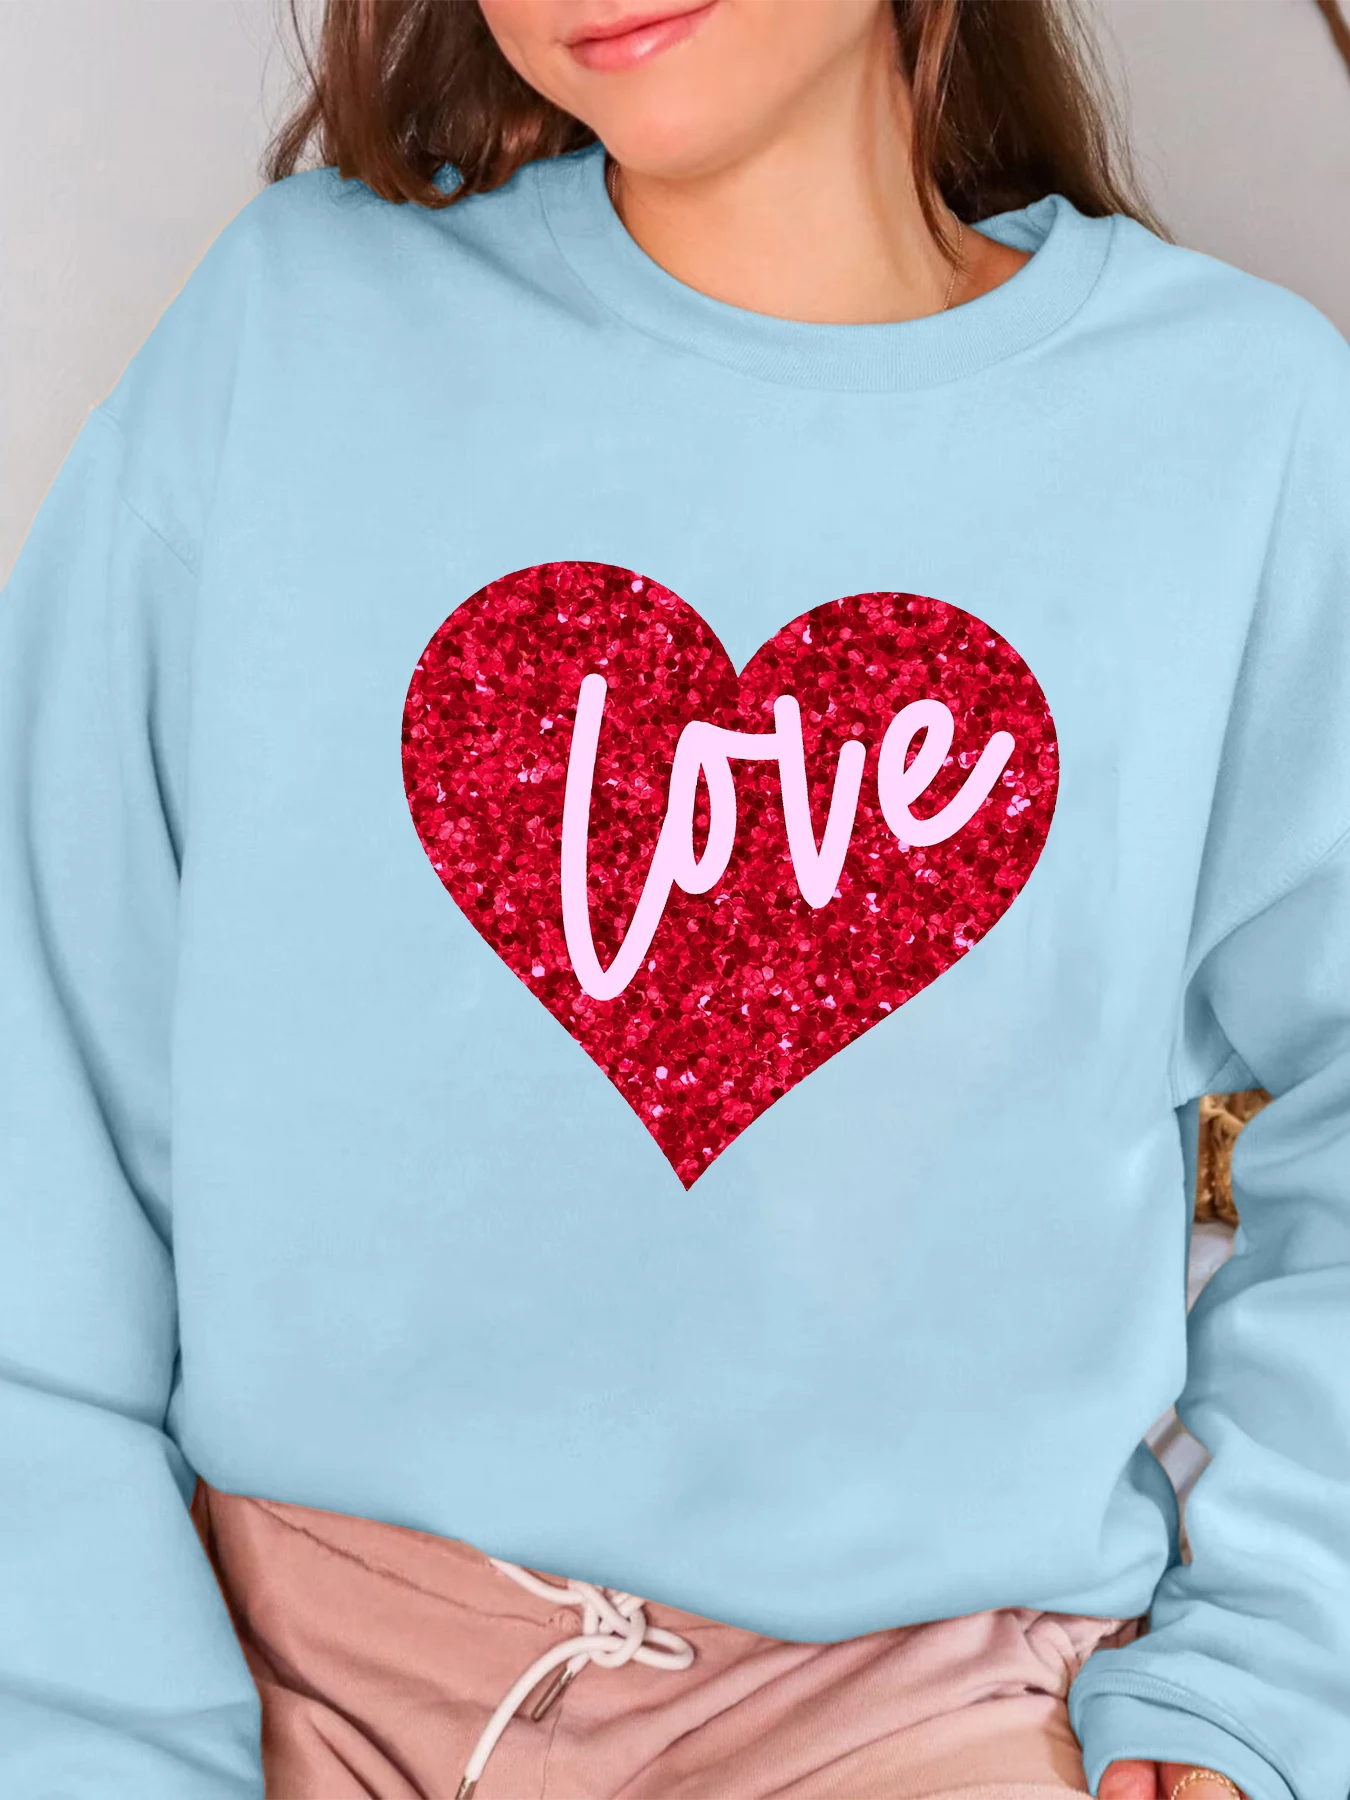 Lovely Spring Woman Sweatshirt Red Heart Graphic Print Fashion Casual Comfort Long Sleeve  Pullover for Holiday Outfits fashion silicone heart shaped wrist pad wavy comfort gel hand computer mouse support cushion wrist cushion rests